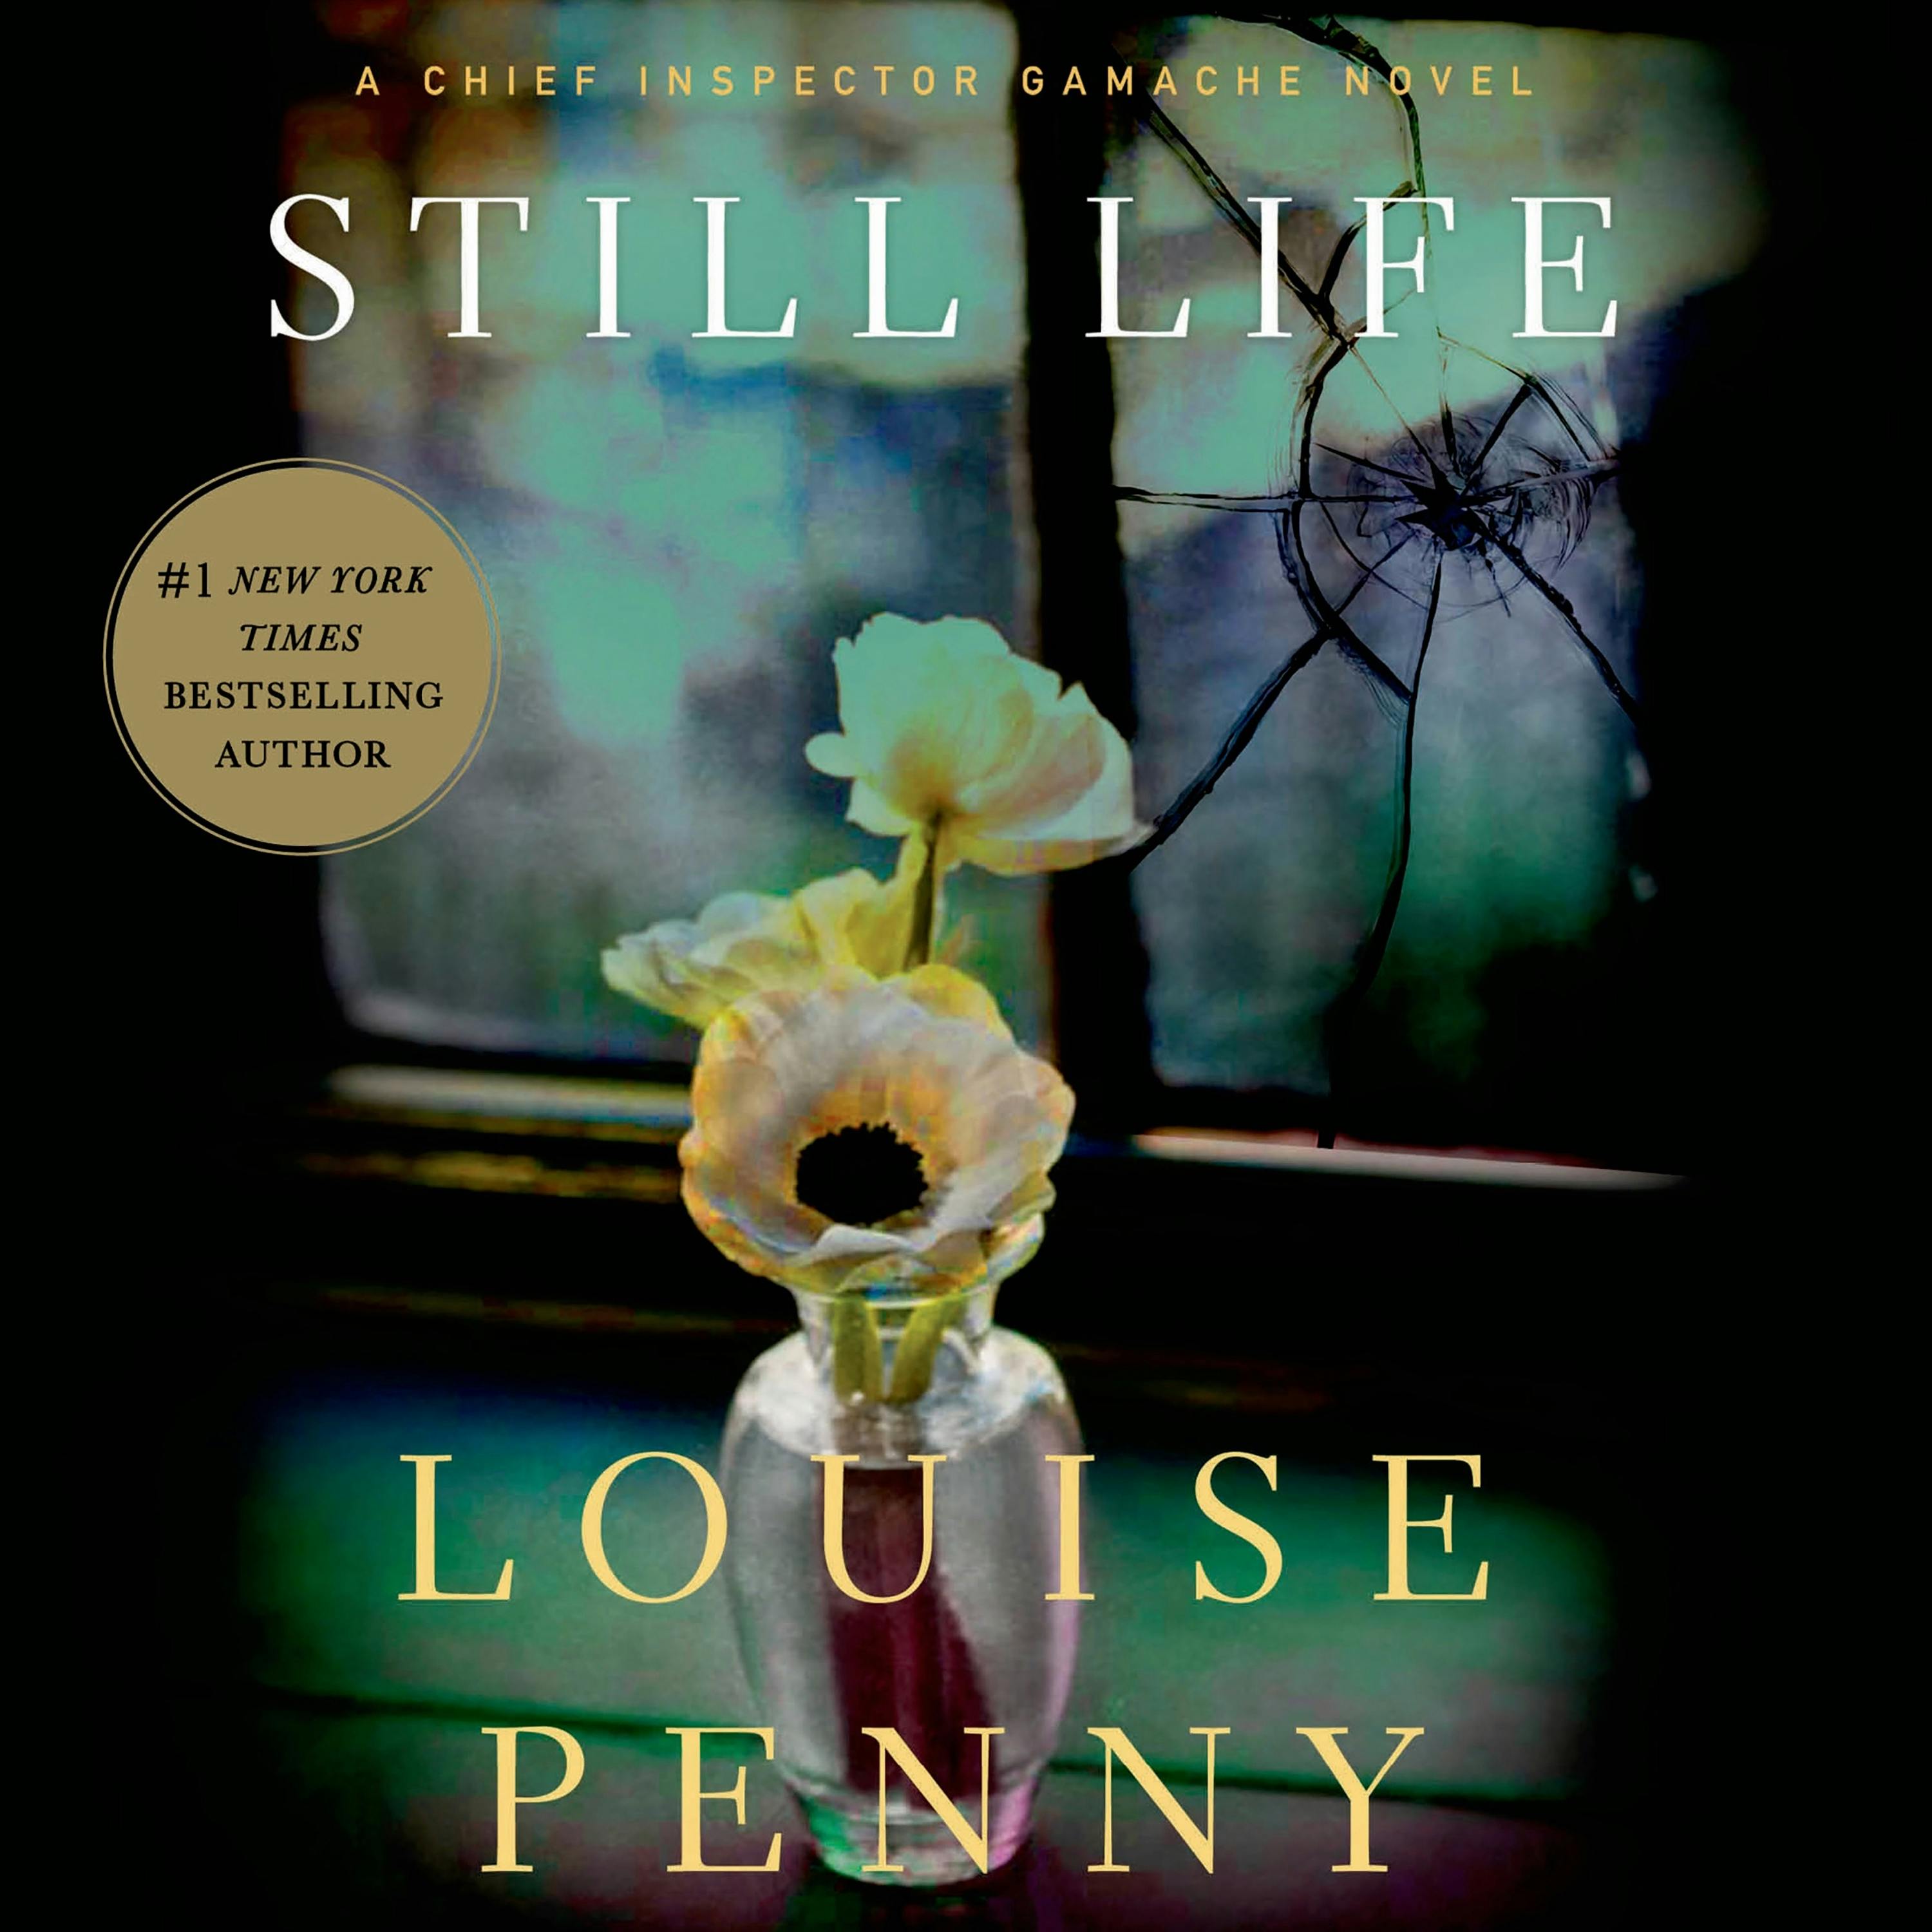 Critics At Large : The Heart of Darkness in the Novels of Louise Penny